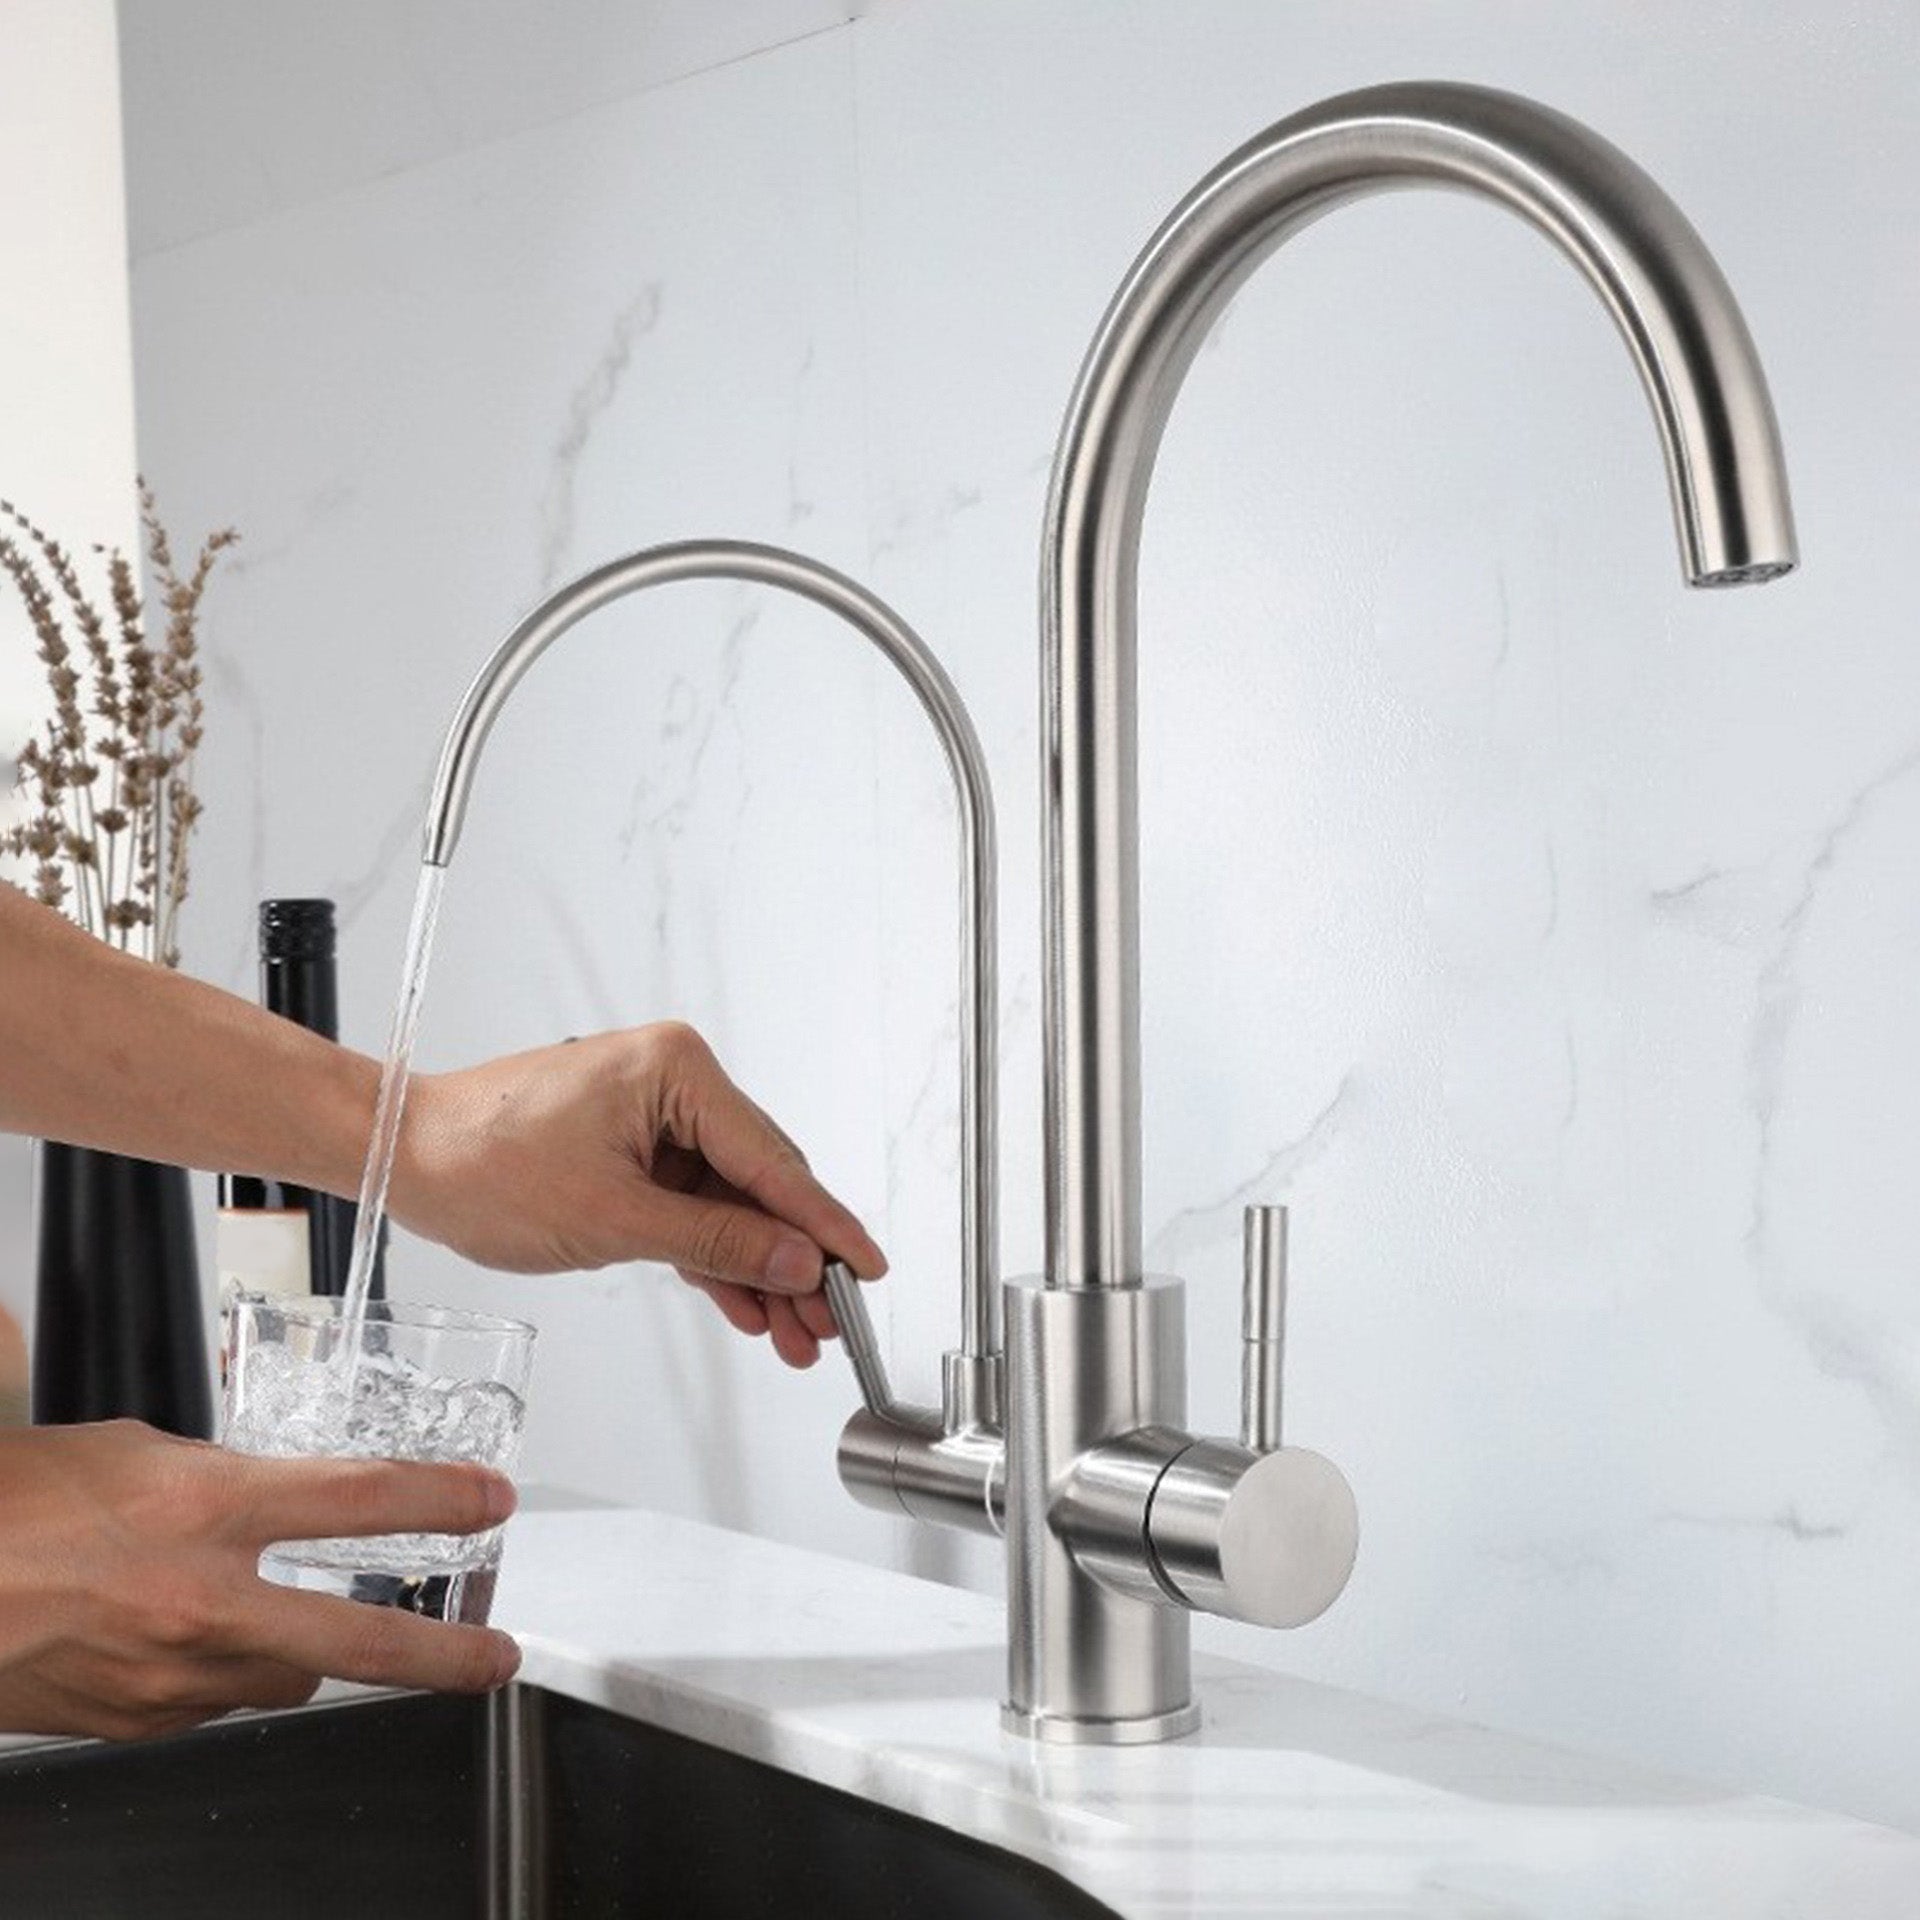 Modern Spray Kitchen Faucet Stainless Steel Swivel Spout with Water Dispenser Sink Faucet